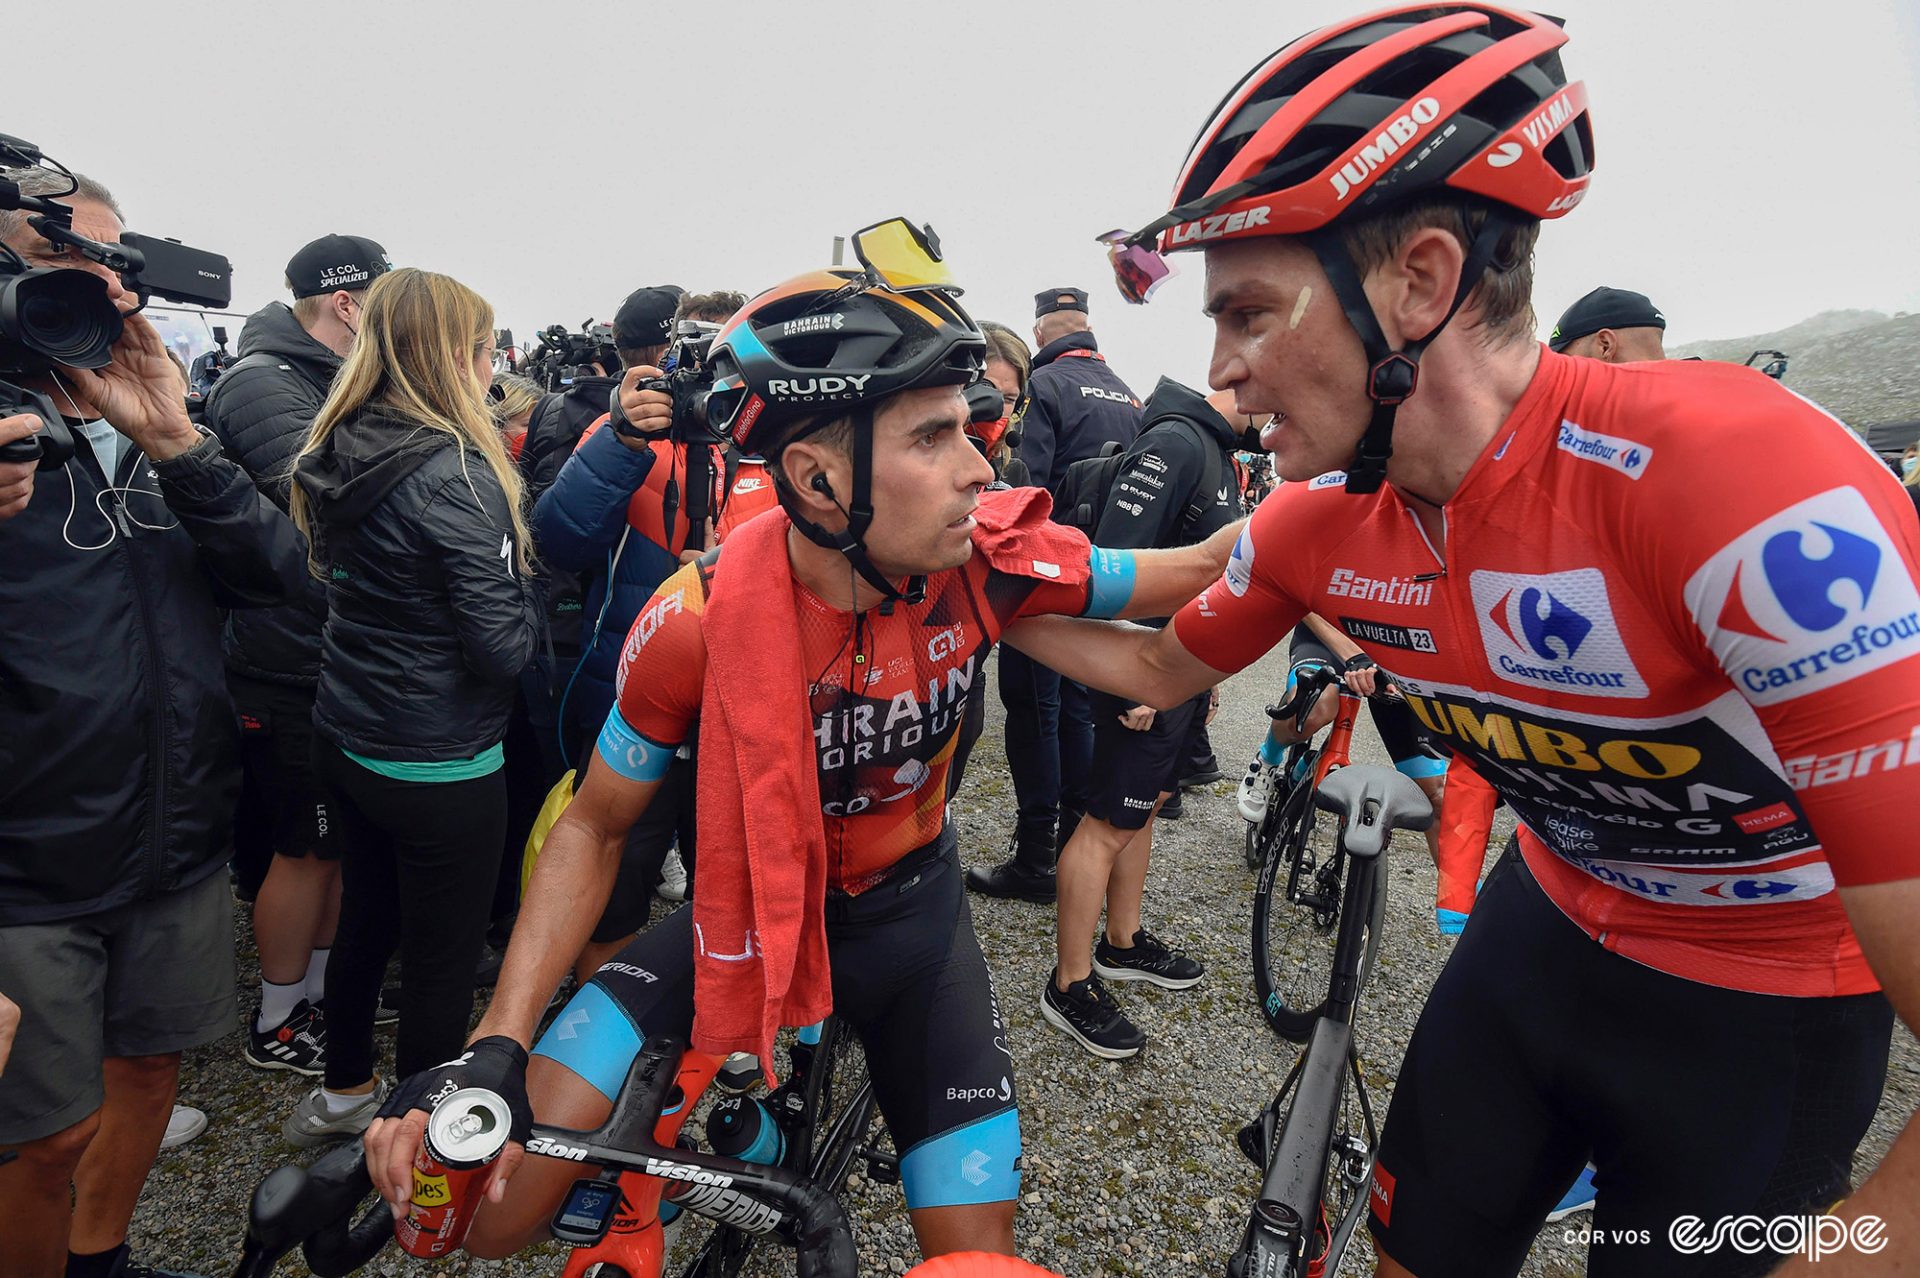 Mikel Landa and Sepp Kuss share a word at the finish of stage 17. Both have intense expressions as they put a hand on each other's shoulder.